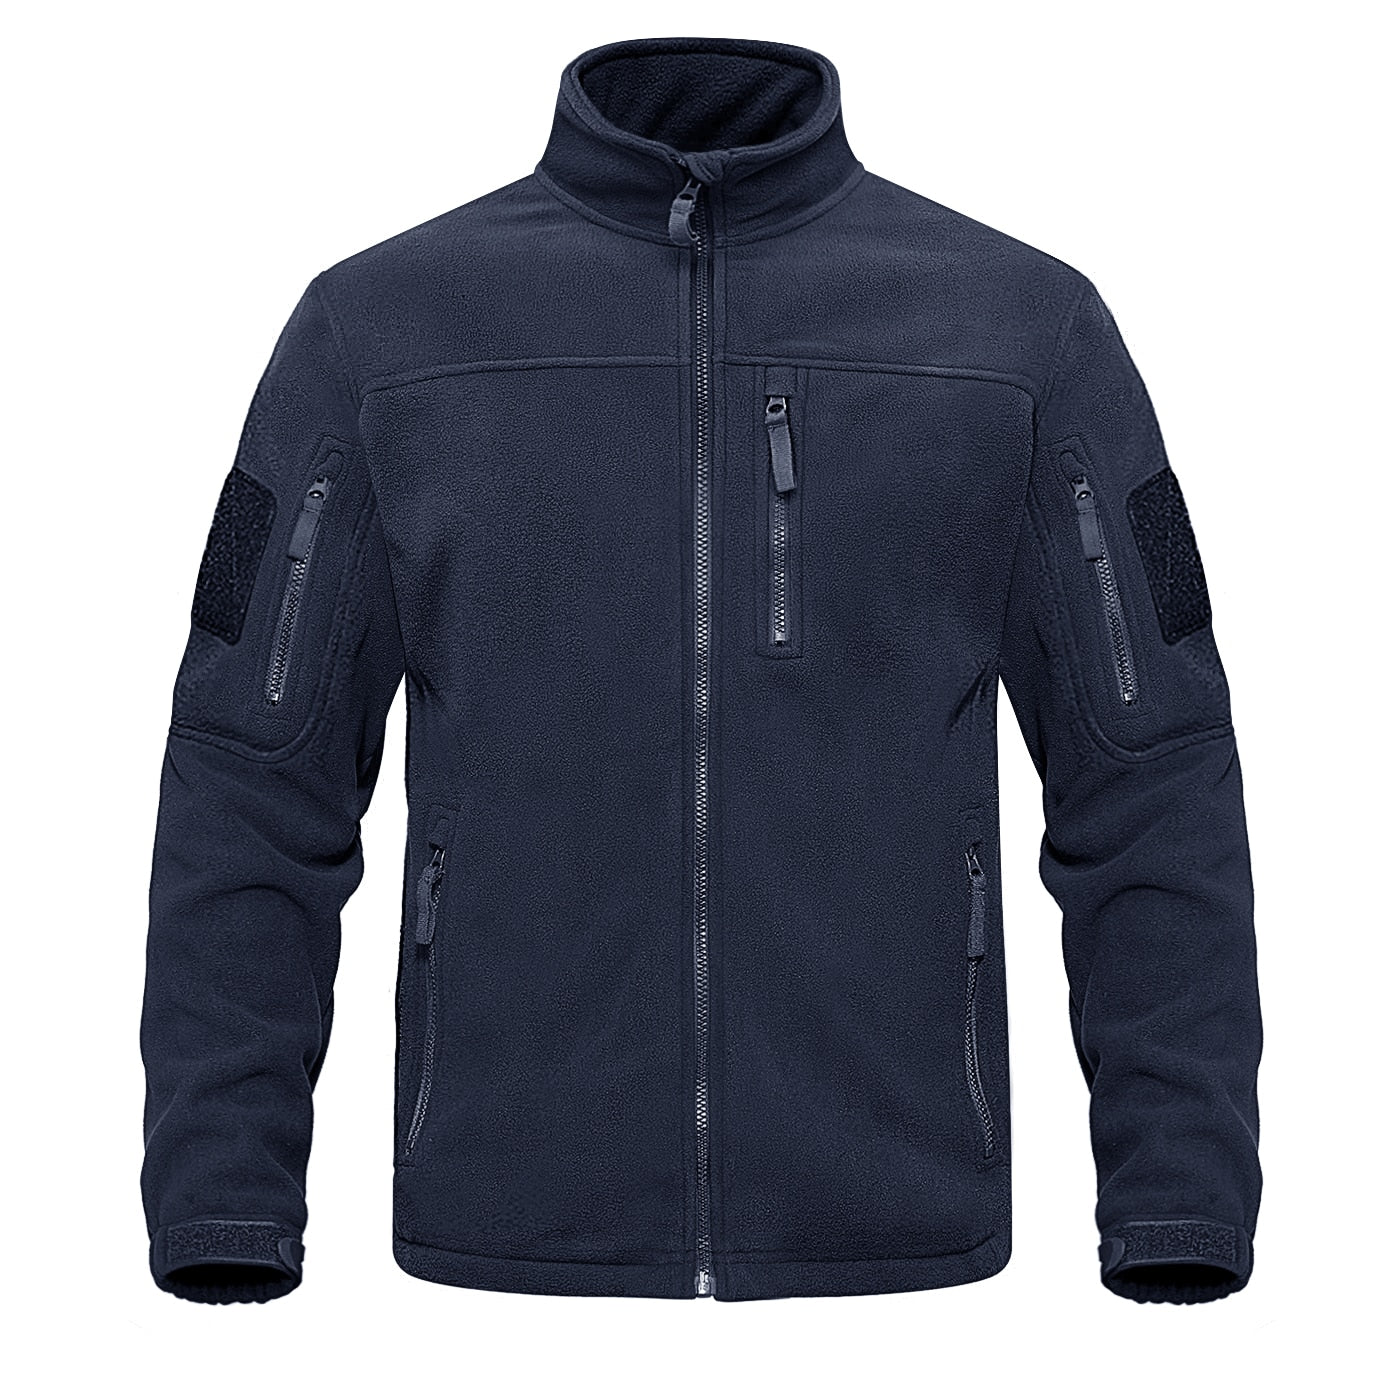 navy blue jacket for fishing